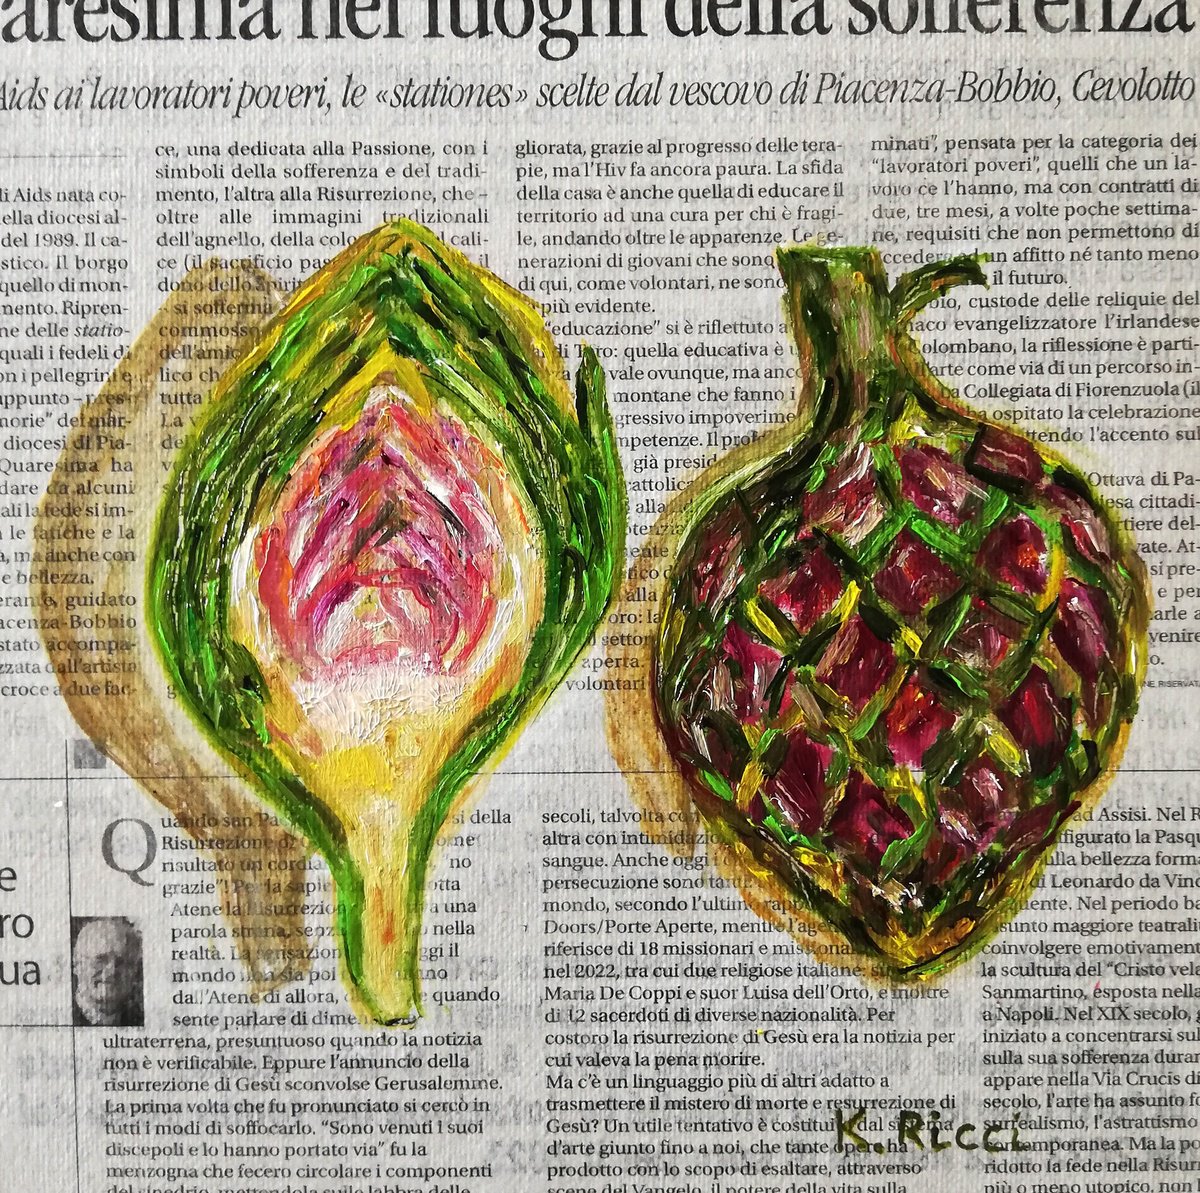 Artichokes on Newspaper Original Oil on Canvas Board Painting 8 by 8 inches (20x20 cm) by Katia Ricci